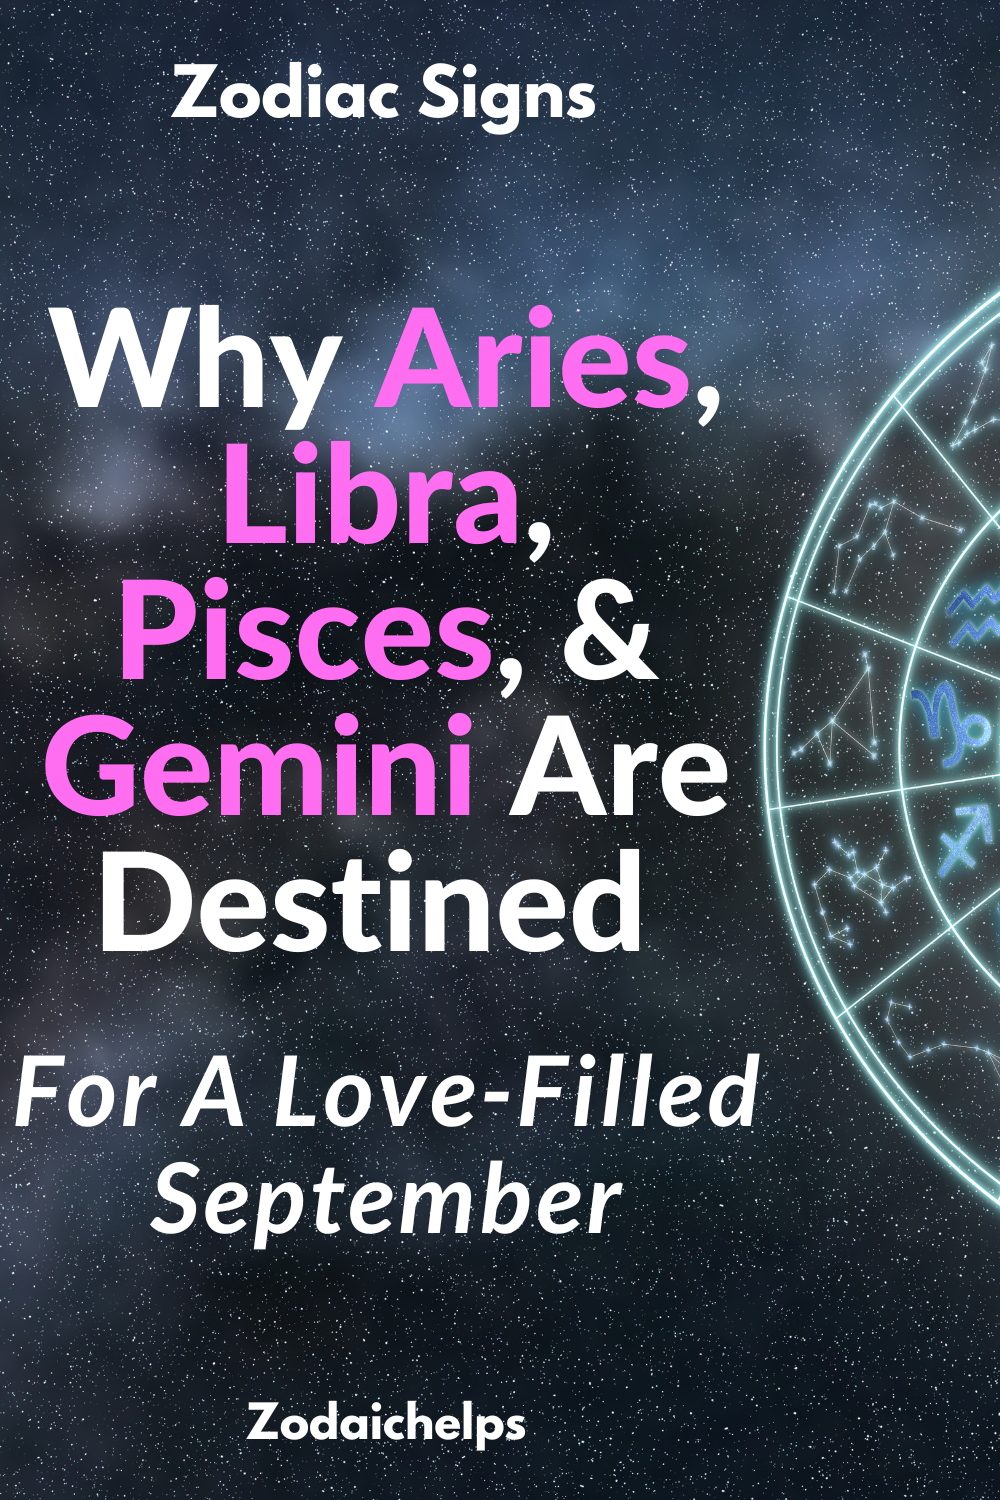 Why Aries, Libra, Pisces, & Gemini Are Destined For A Love-Filled September